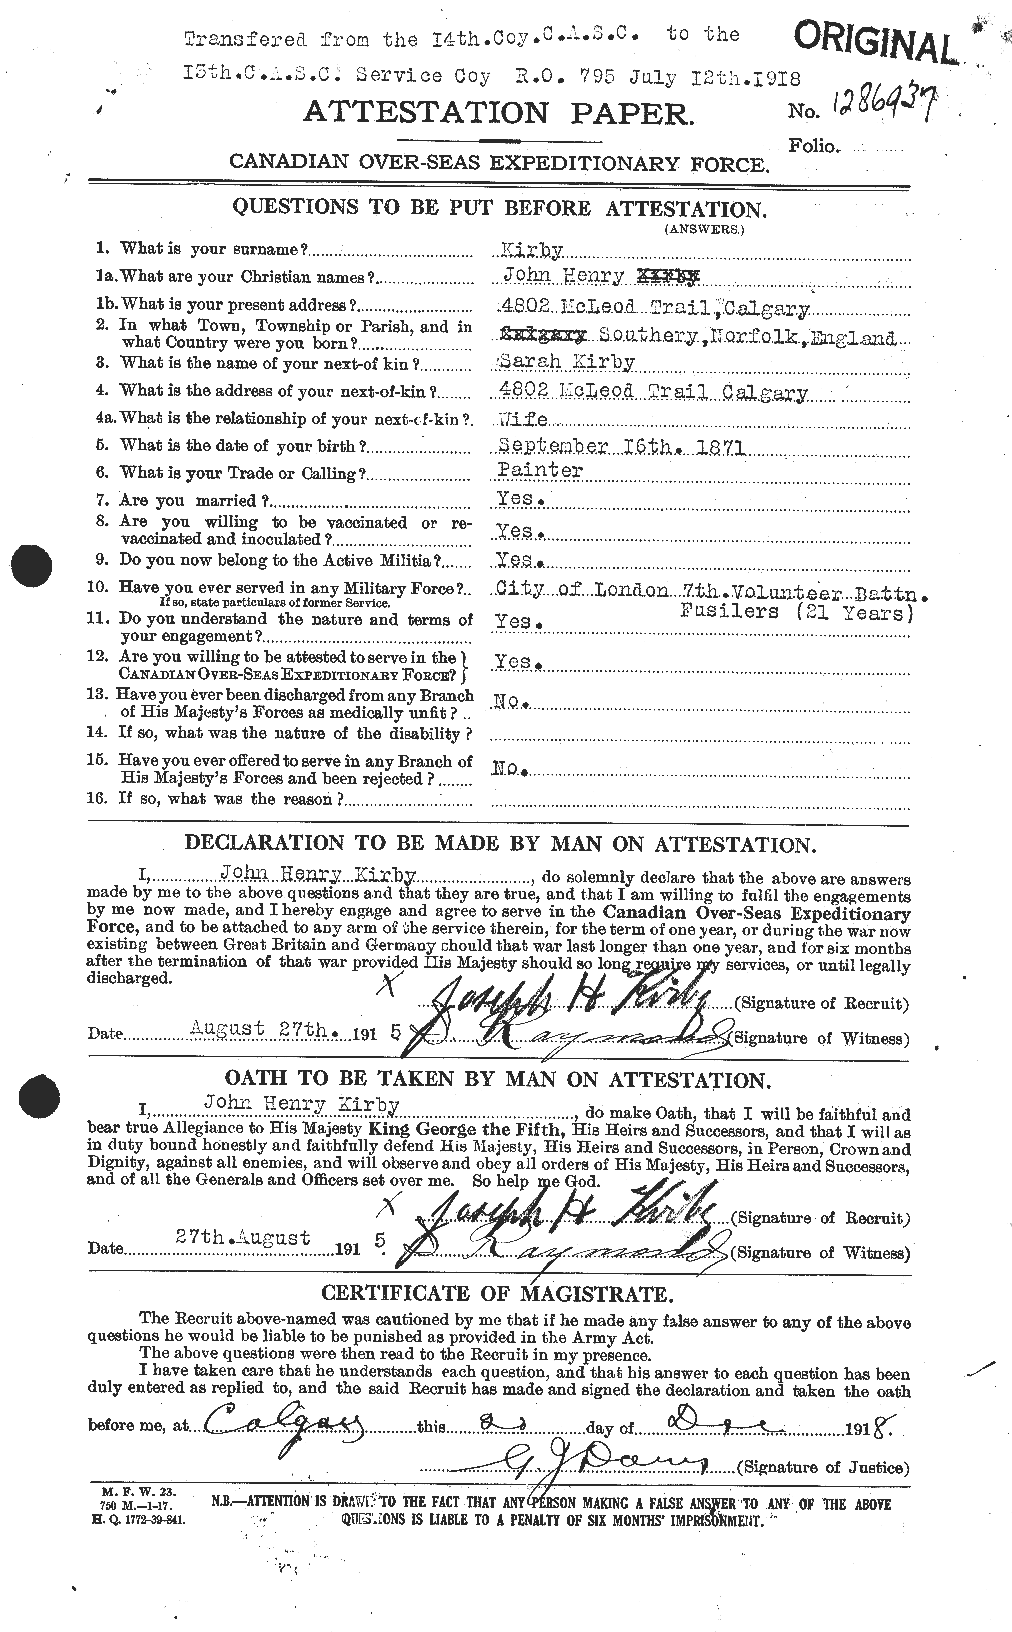 Personnel Records of the First World War - CEF 437231a